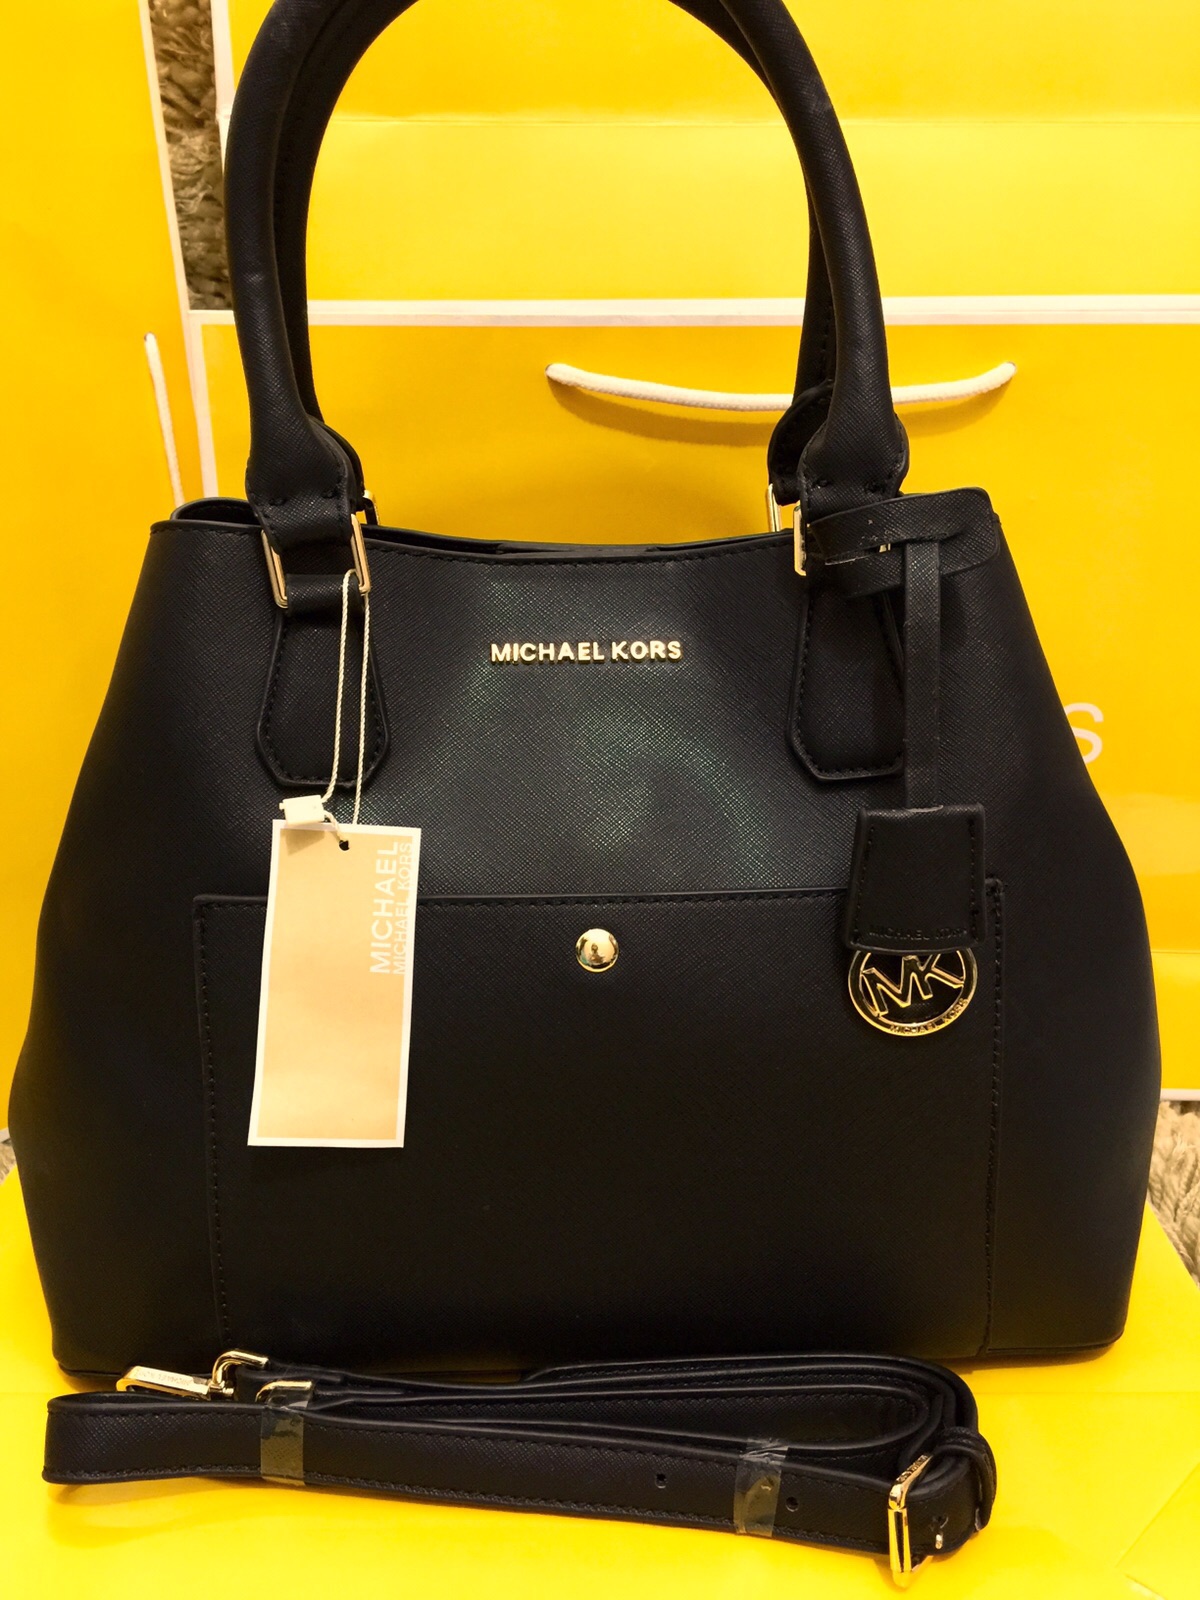 Michael Kors Tote Bags For Women At Discounted Price - Dilli Bazar